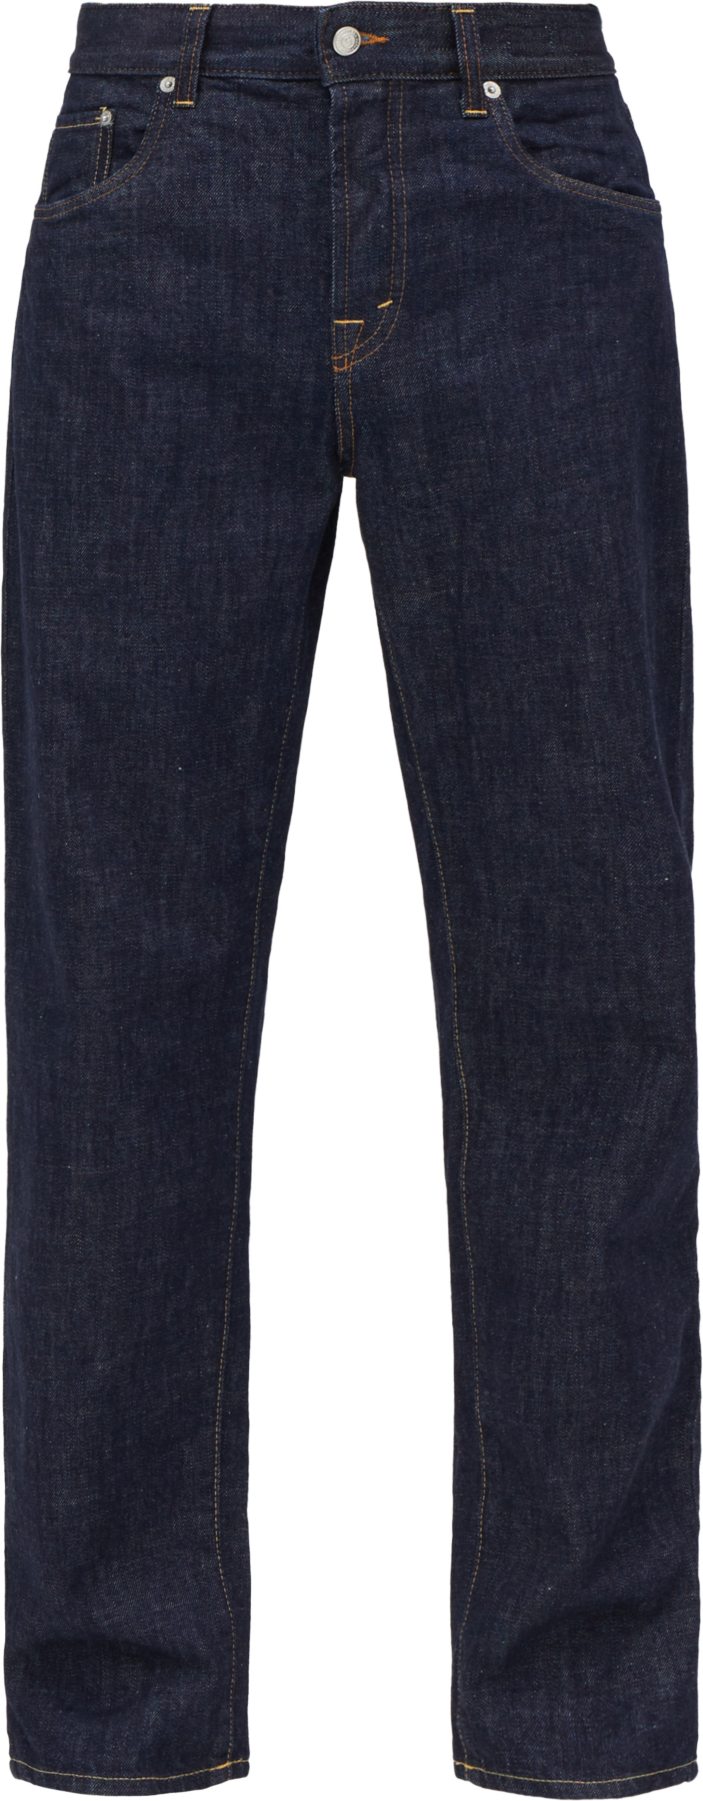 Department 5 Jeans in Slim-Fit 441845